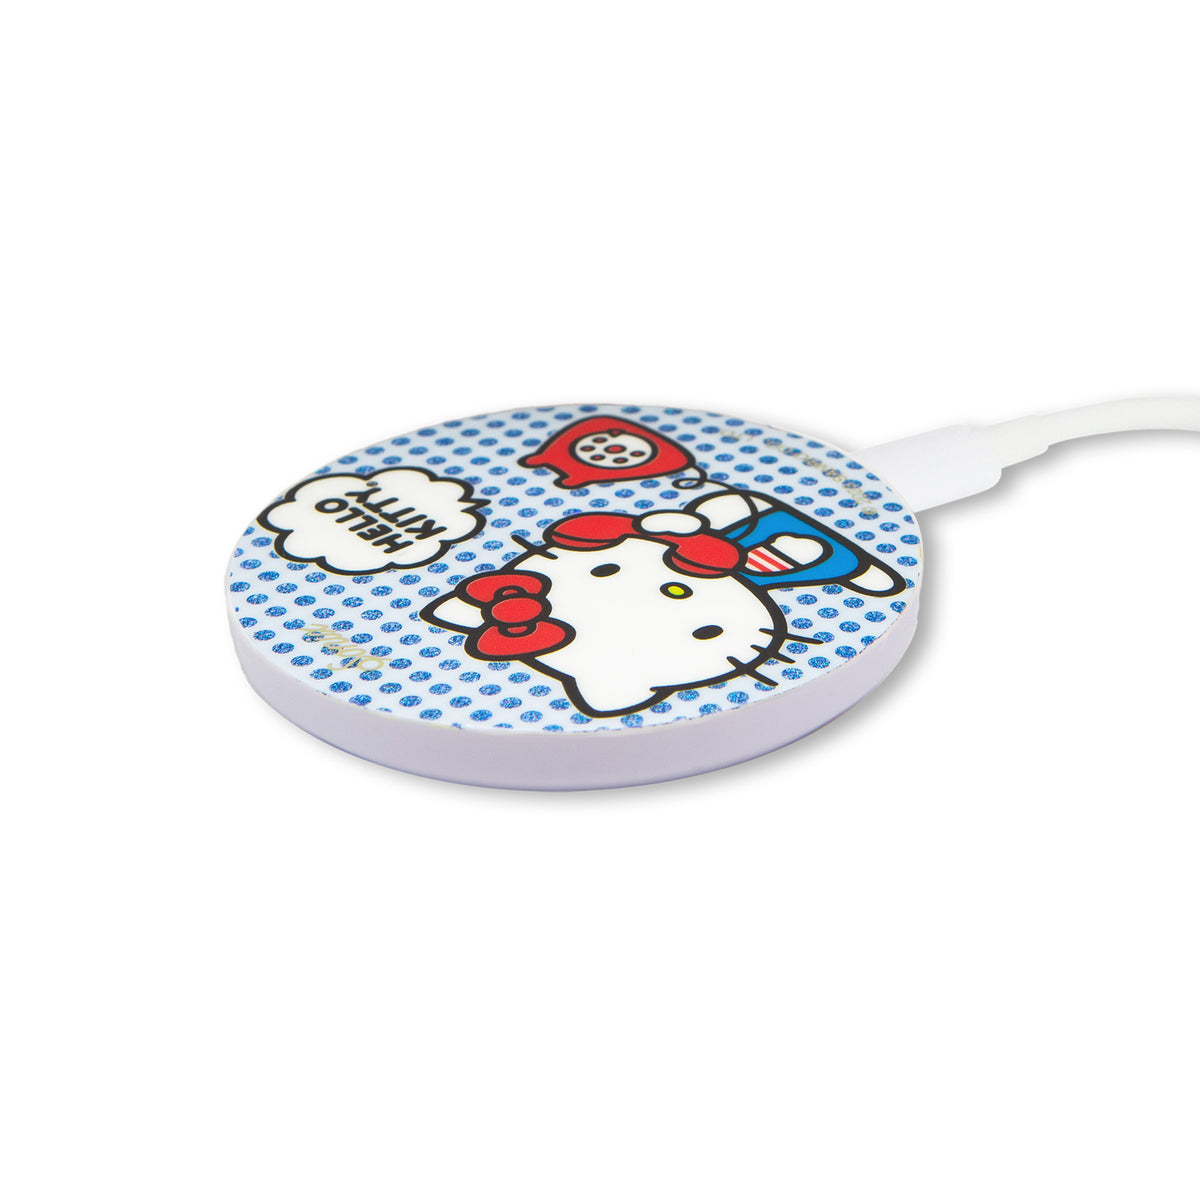 Hello Kitty x Sonix Good Morning Maglink™ Charger Electronic BySonix Inc.   